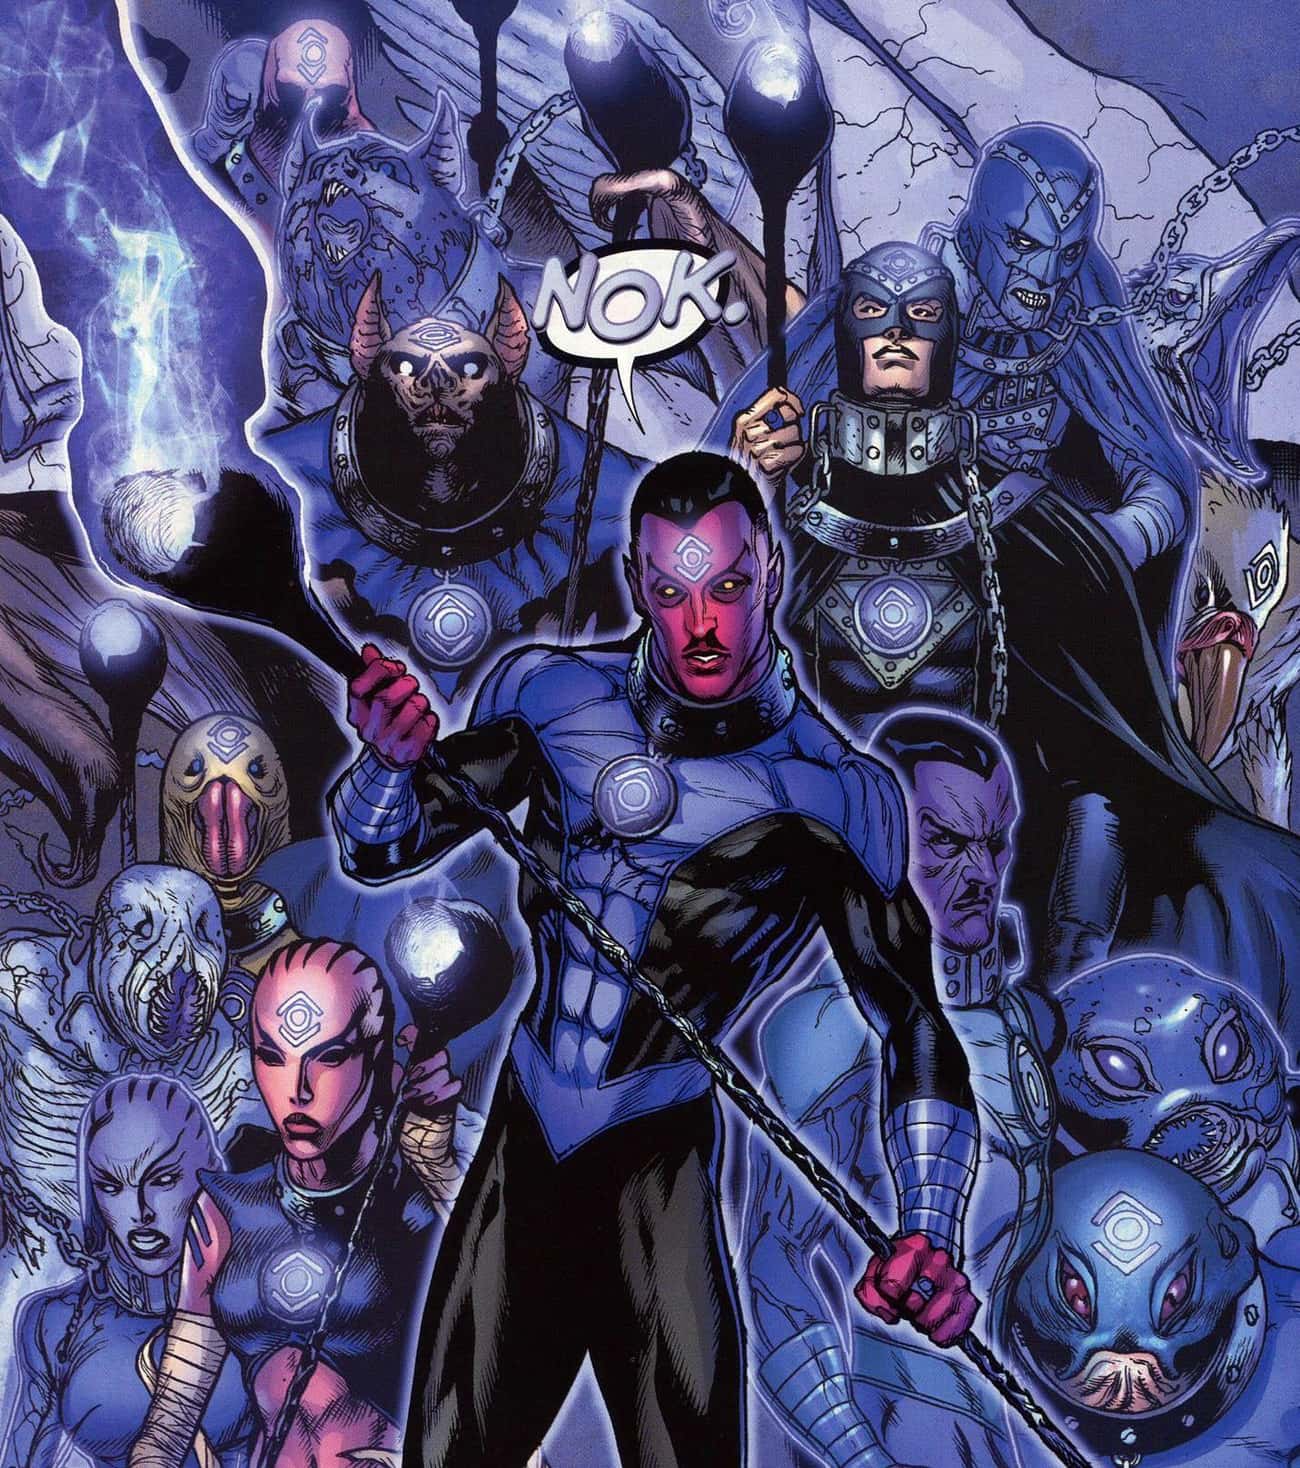 The Indigo Power Ring Spreads Compassion